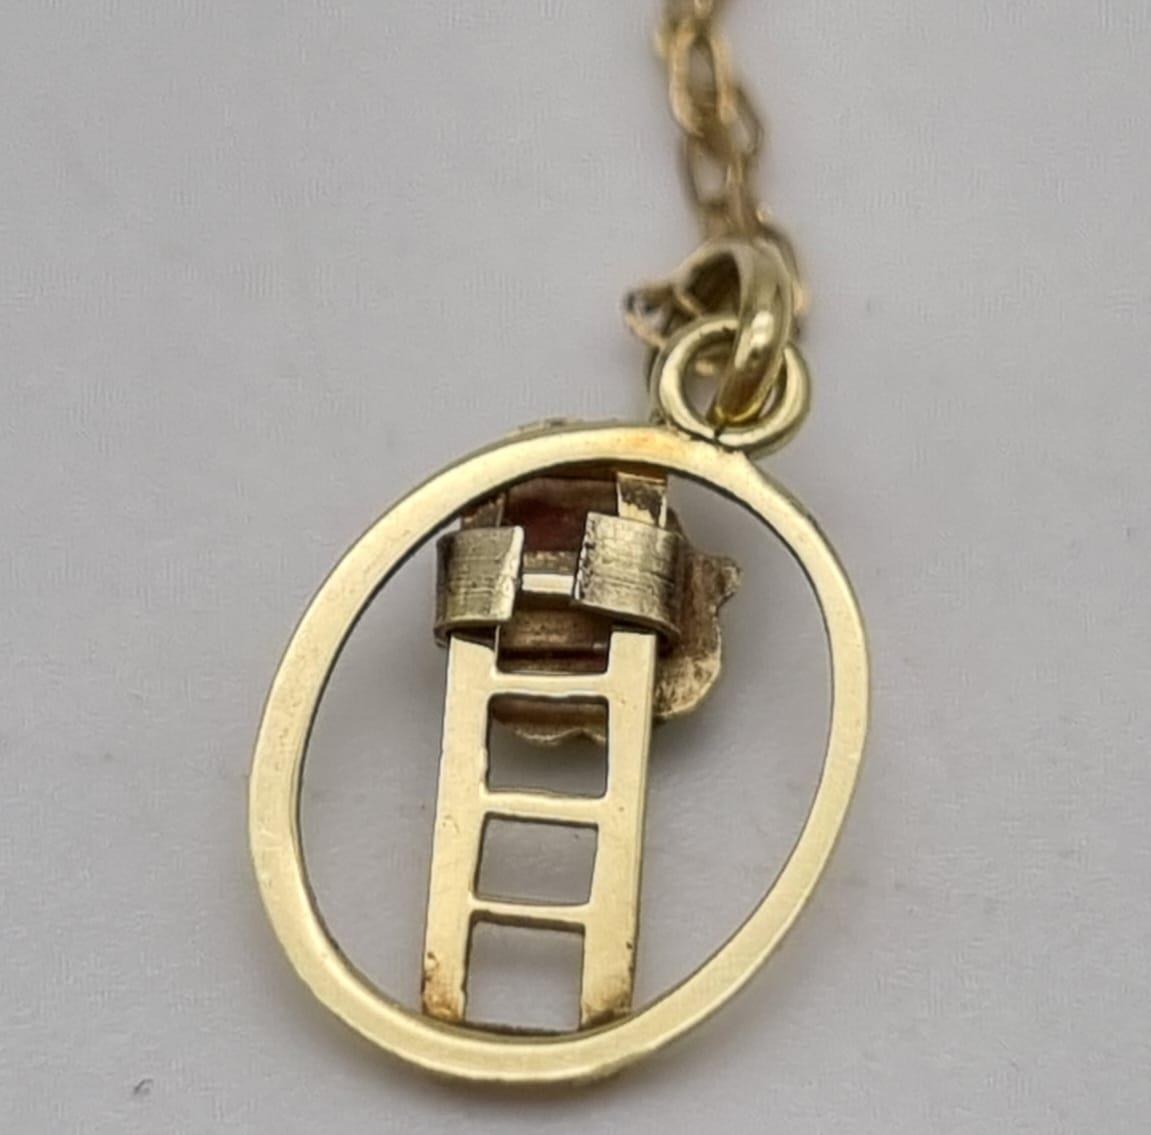 A 9K Yellow Gold Disappearing Necklace with Frog and Ladder Pendant. 44cm. 0.83g - Image 5 of 6